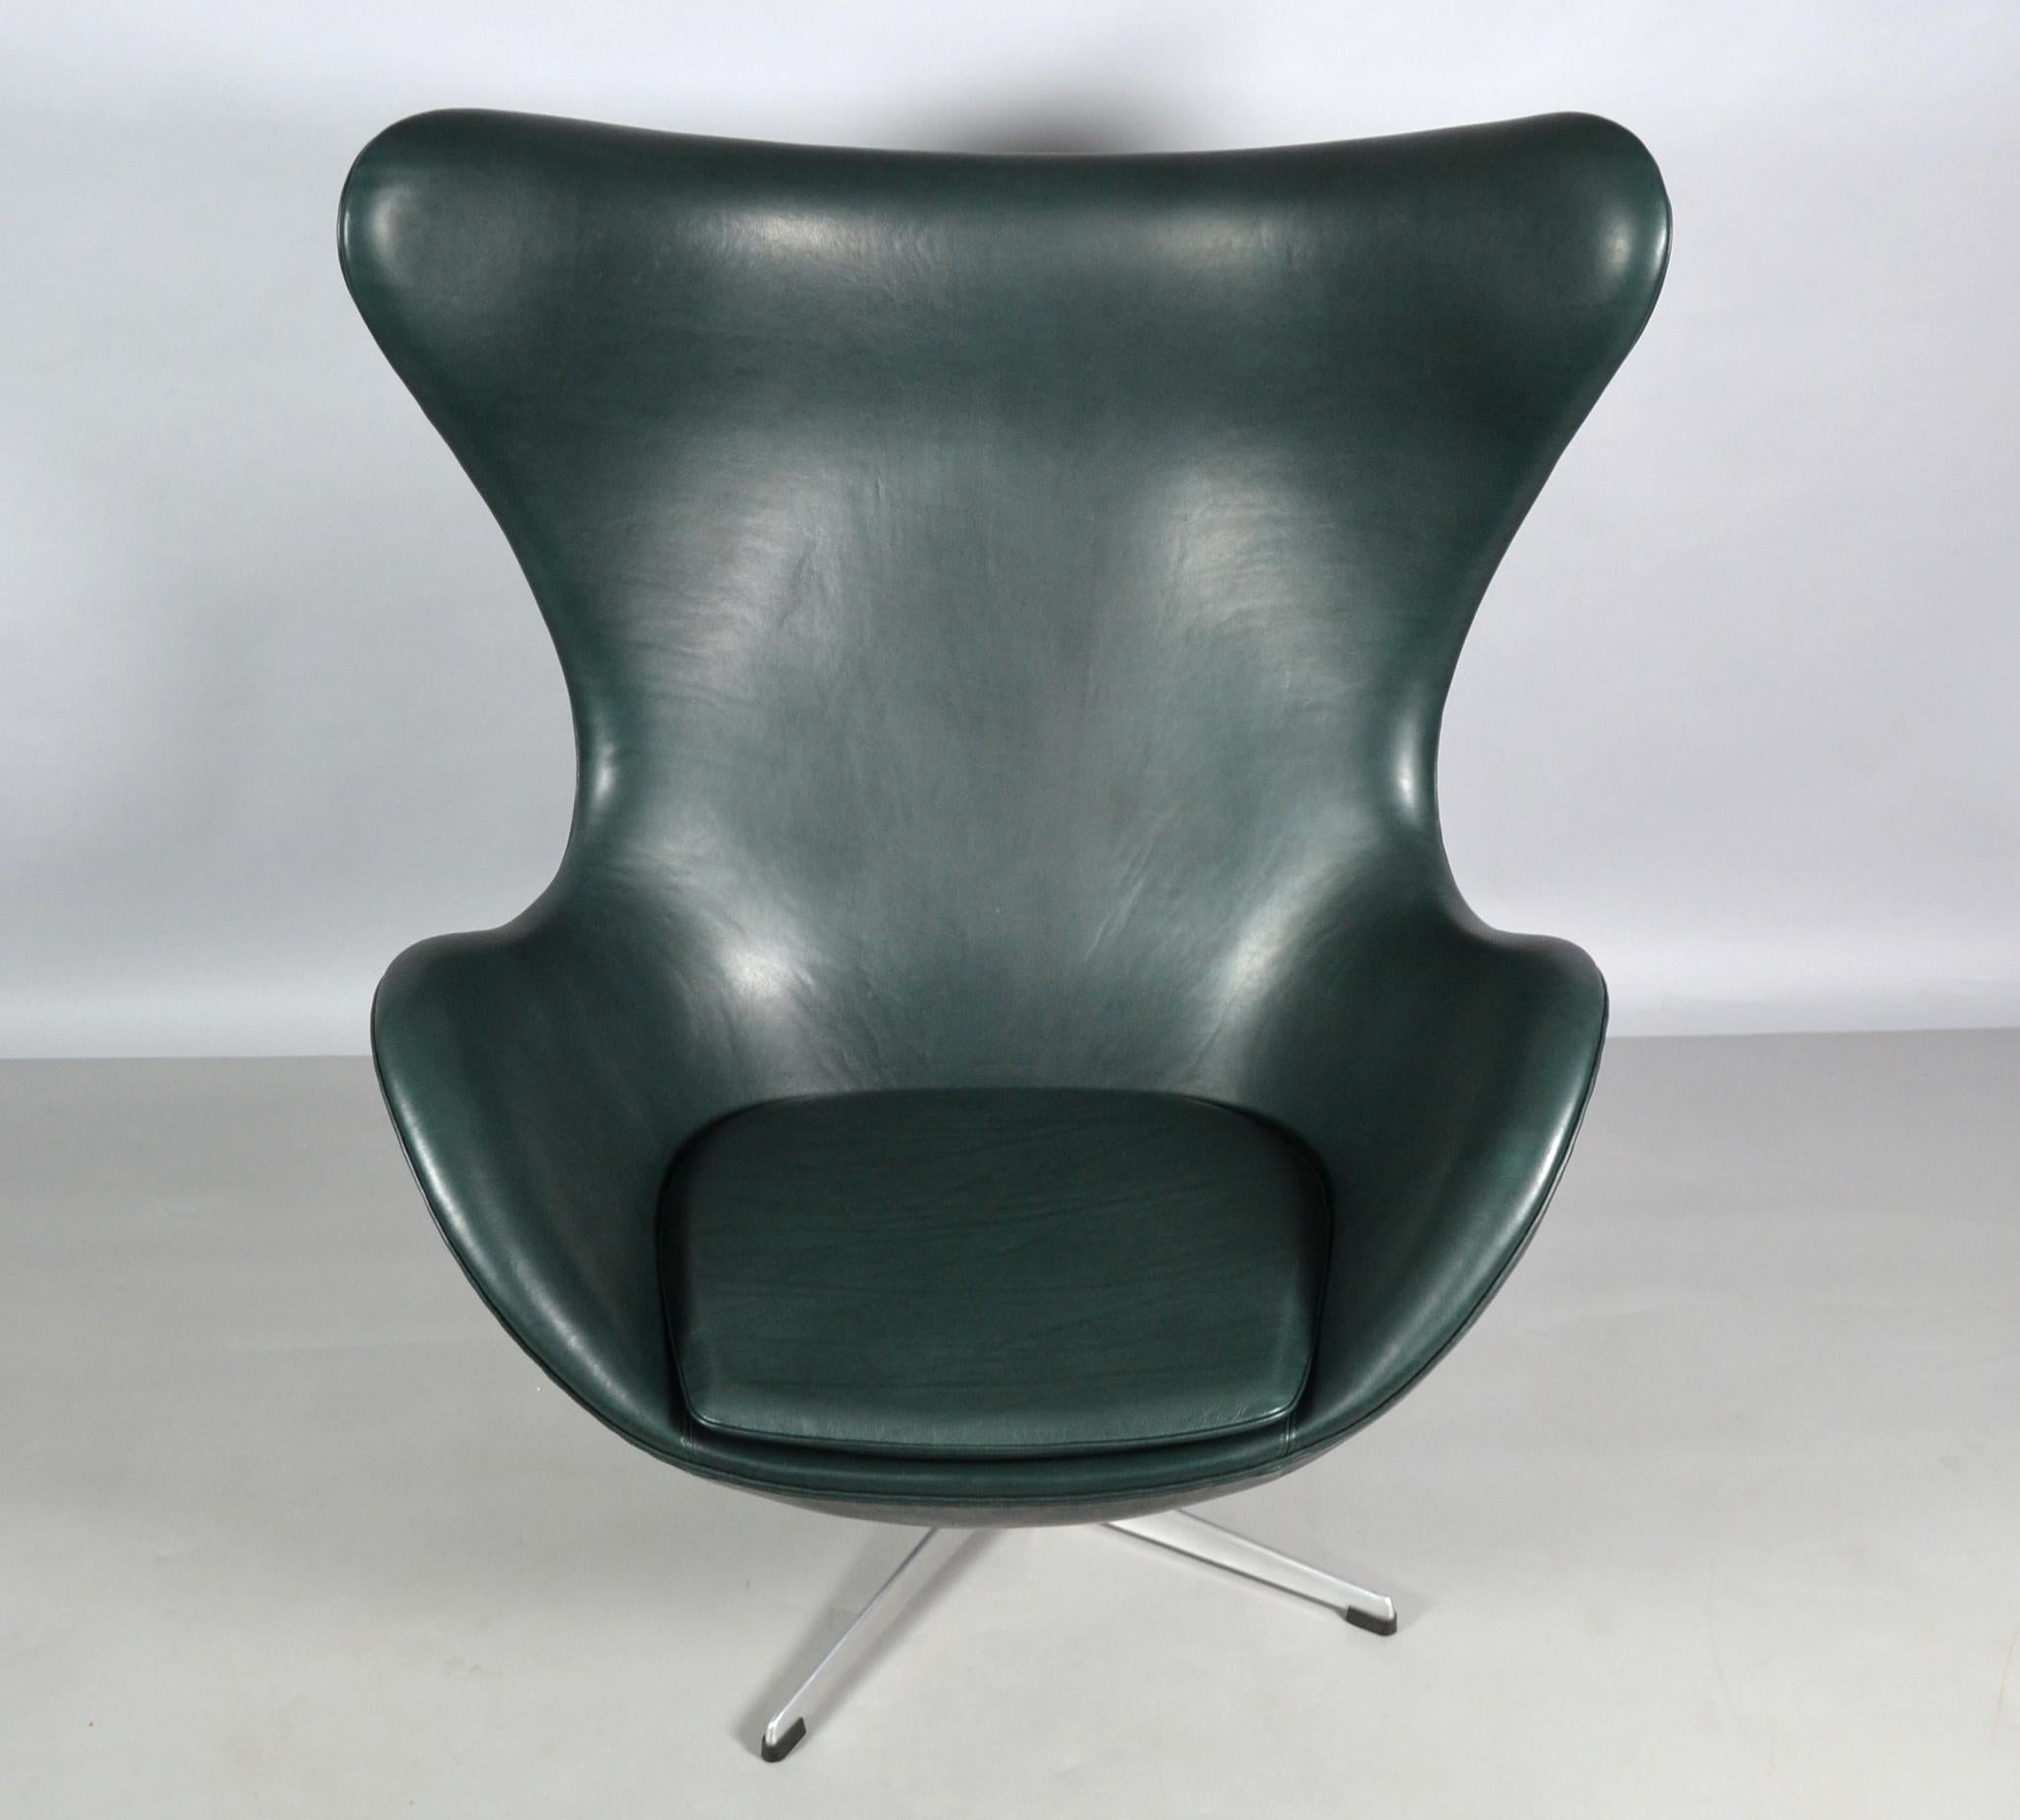 Mid-20th Century Leather Egg Chair by Arne Jacobsen for Fritz Hansen, 1970s New Green Leather